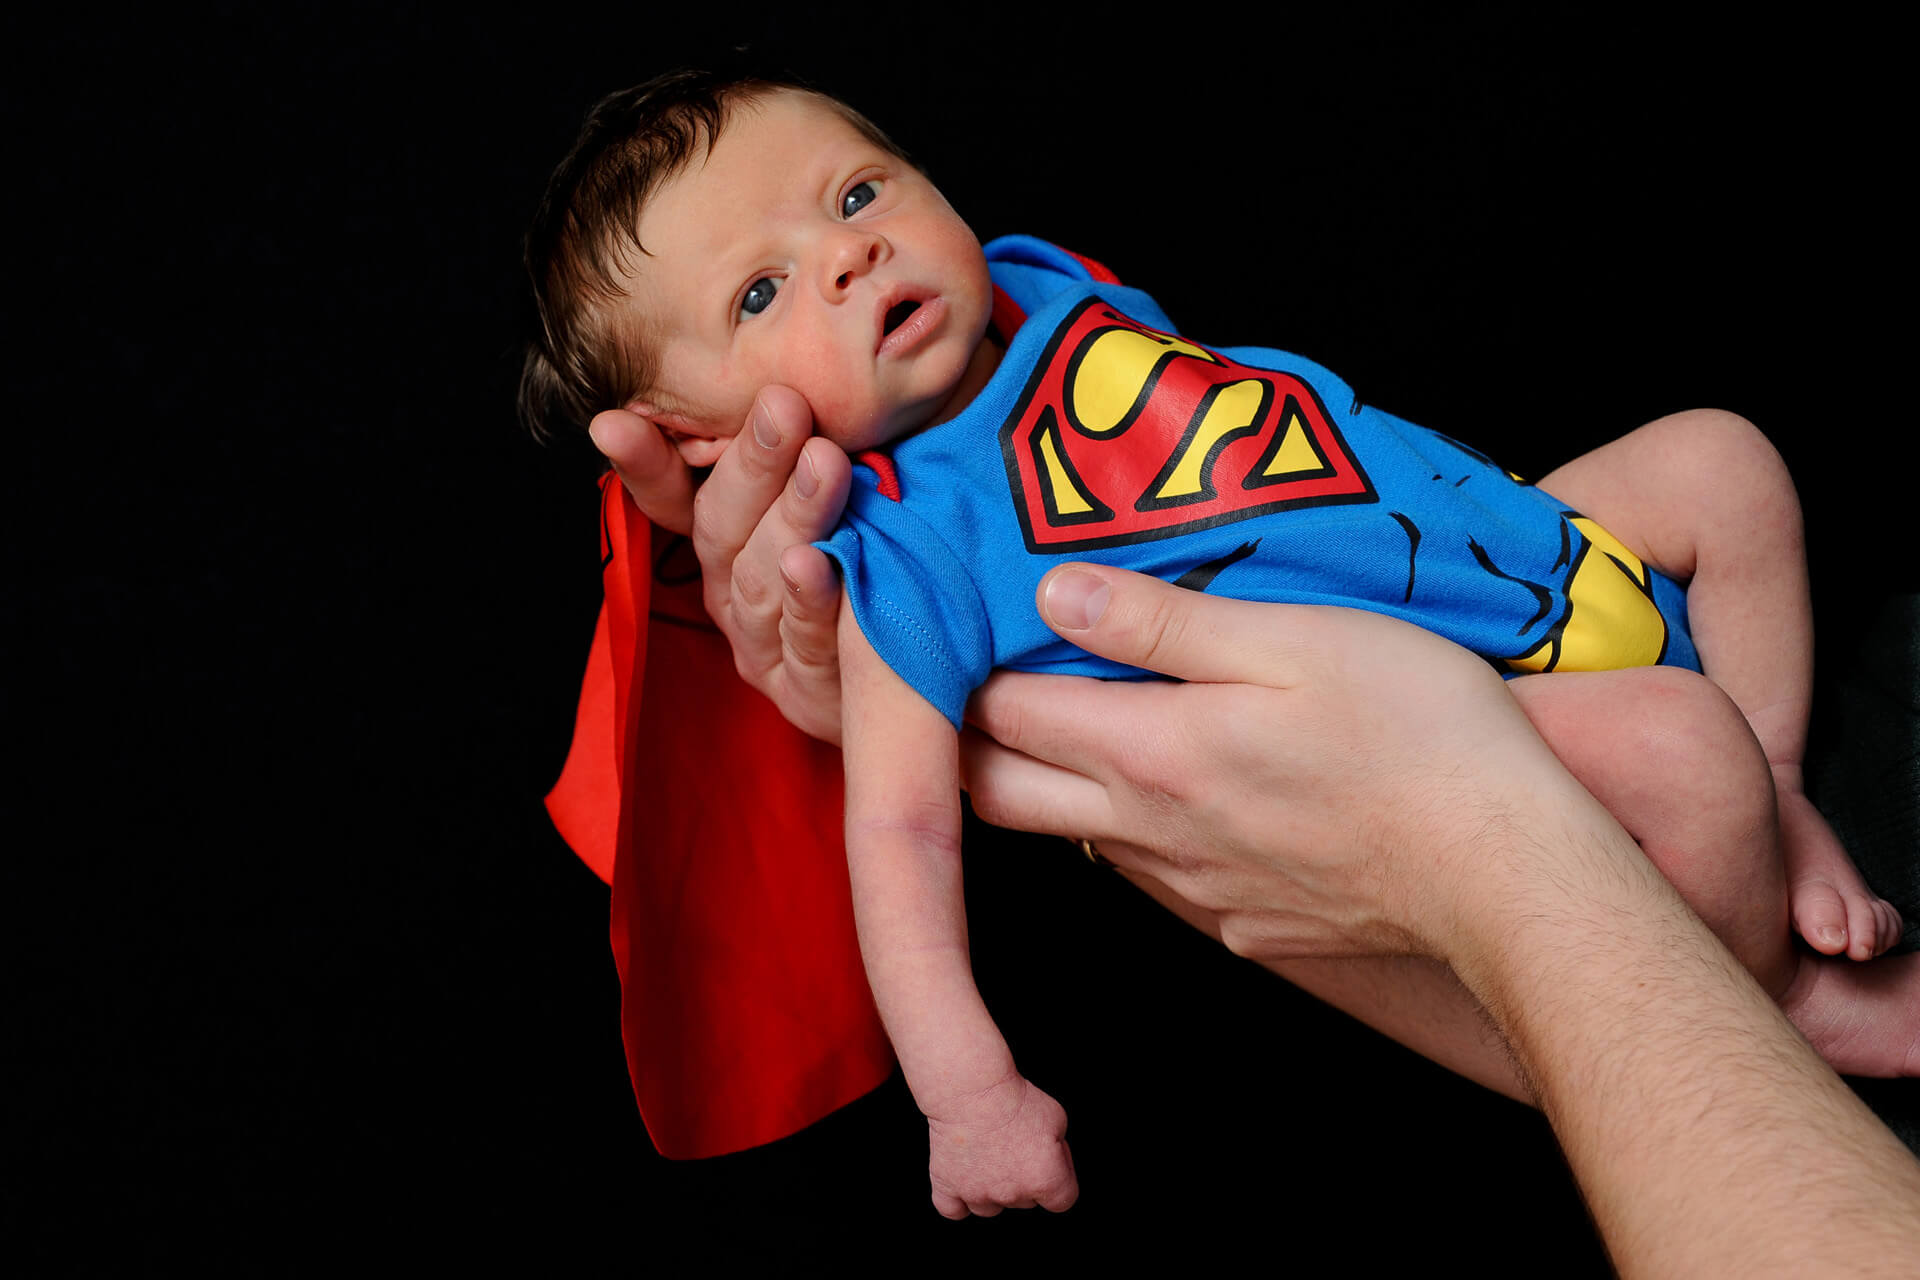 Best Detroit baby photographer's fun and candid infant photos combine fun activities like being a super hero in metro Detroit, Michigan.